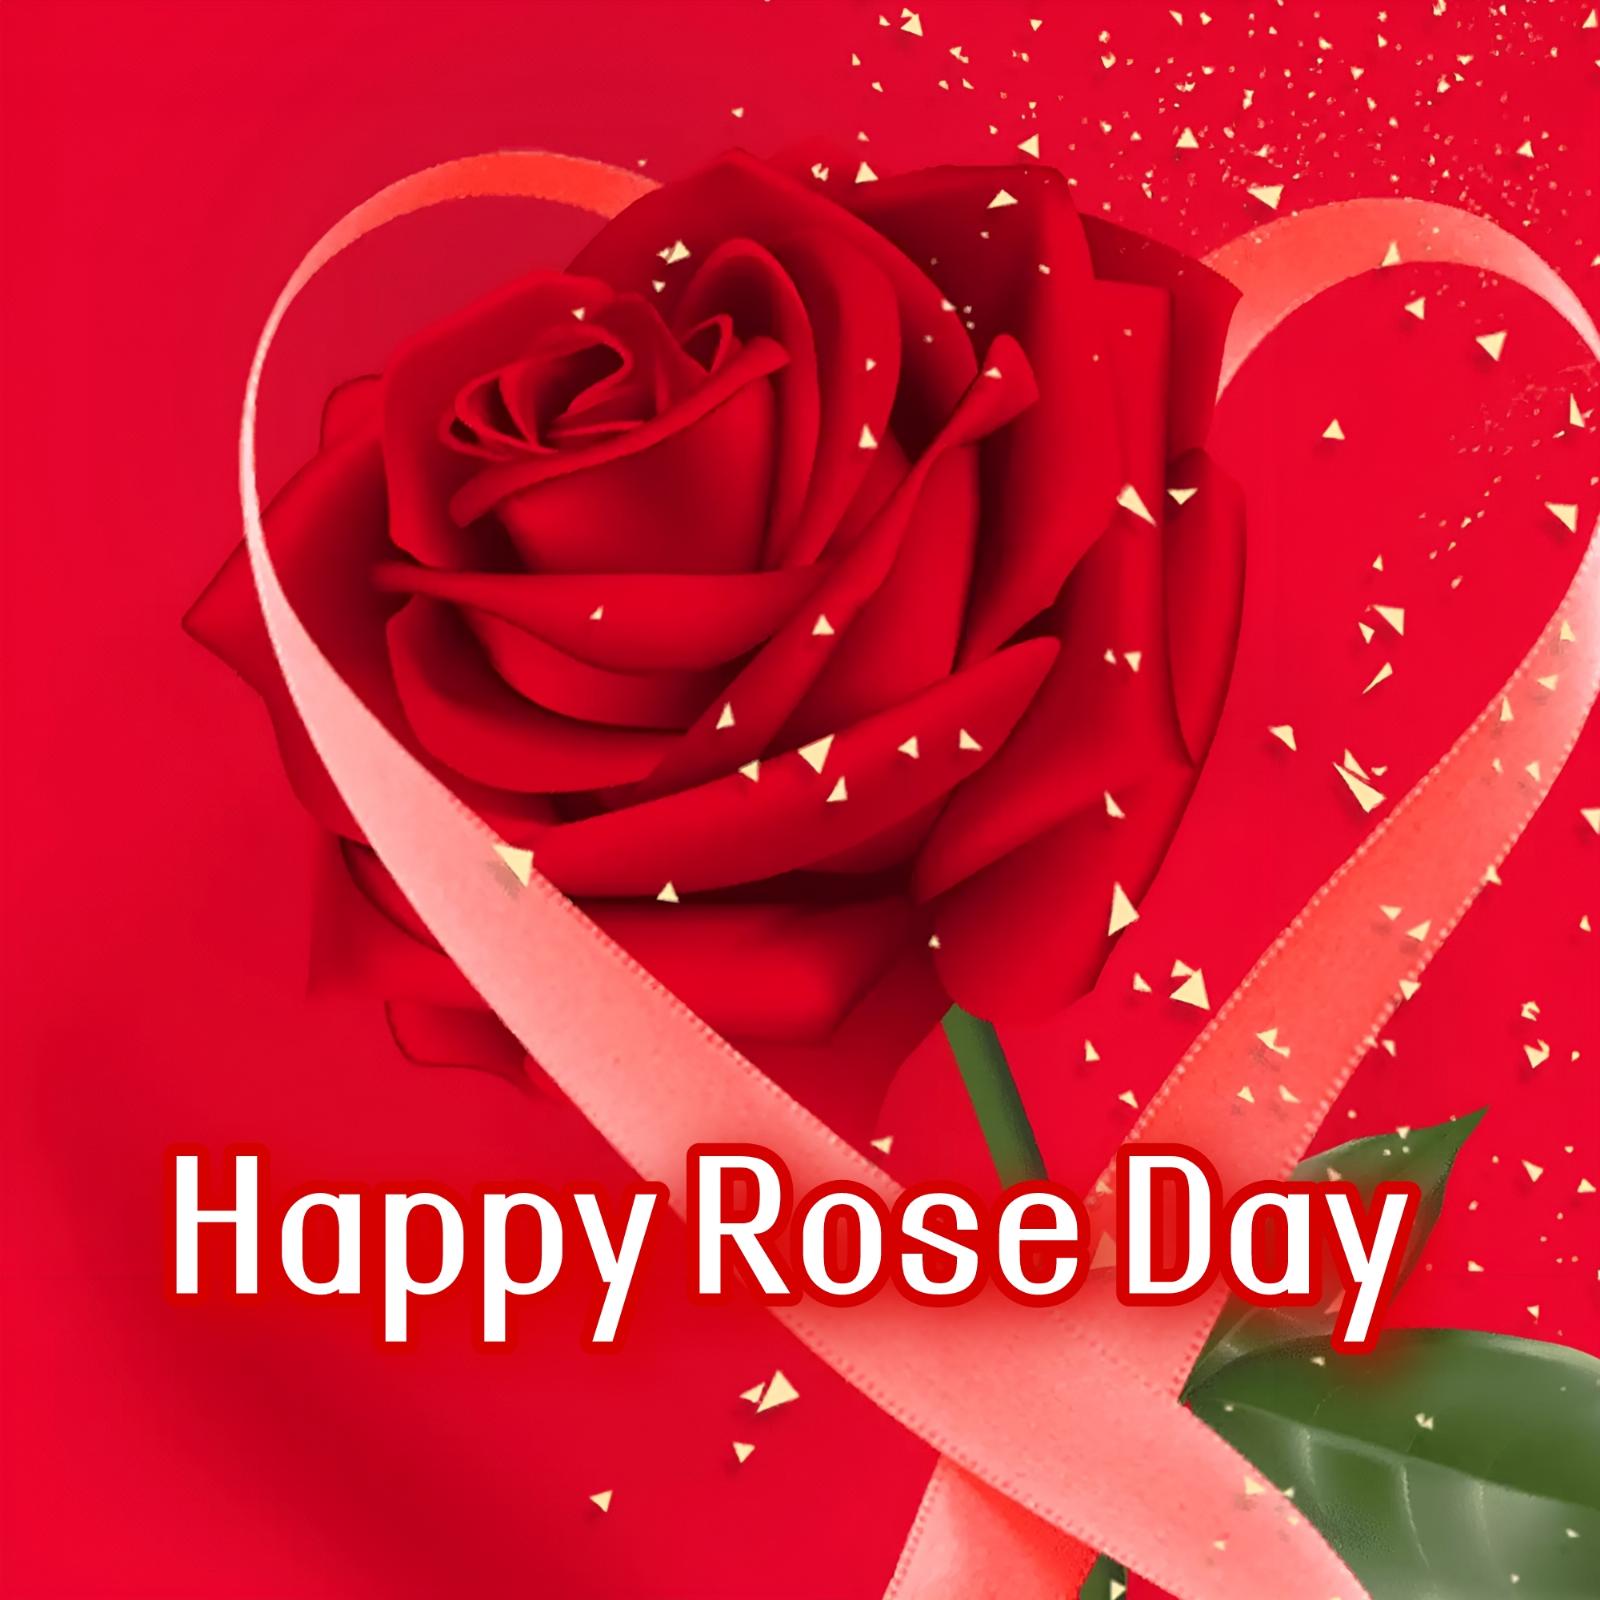 Happy Rose Day 2020: Images, Quotes, Wishes, Greetings, Messages, Cards,  Pictures, GIFs and Wallpapers - Times of India